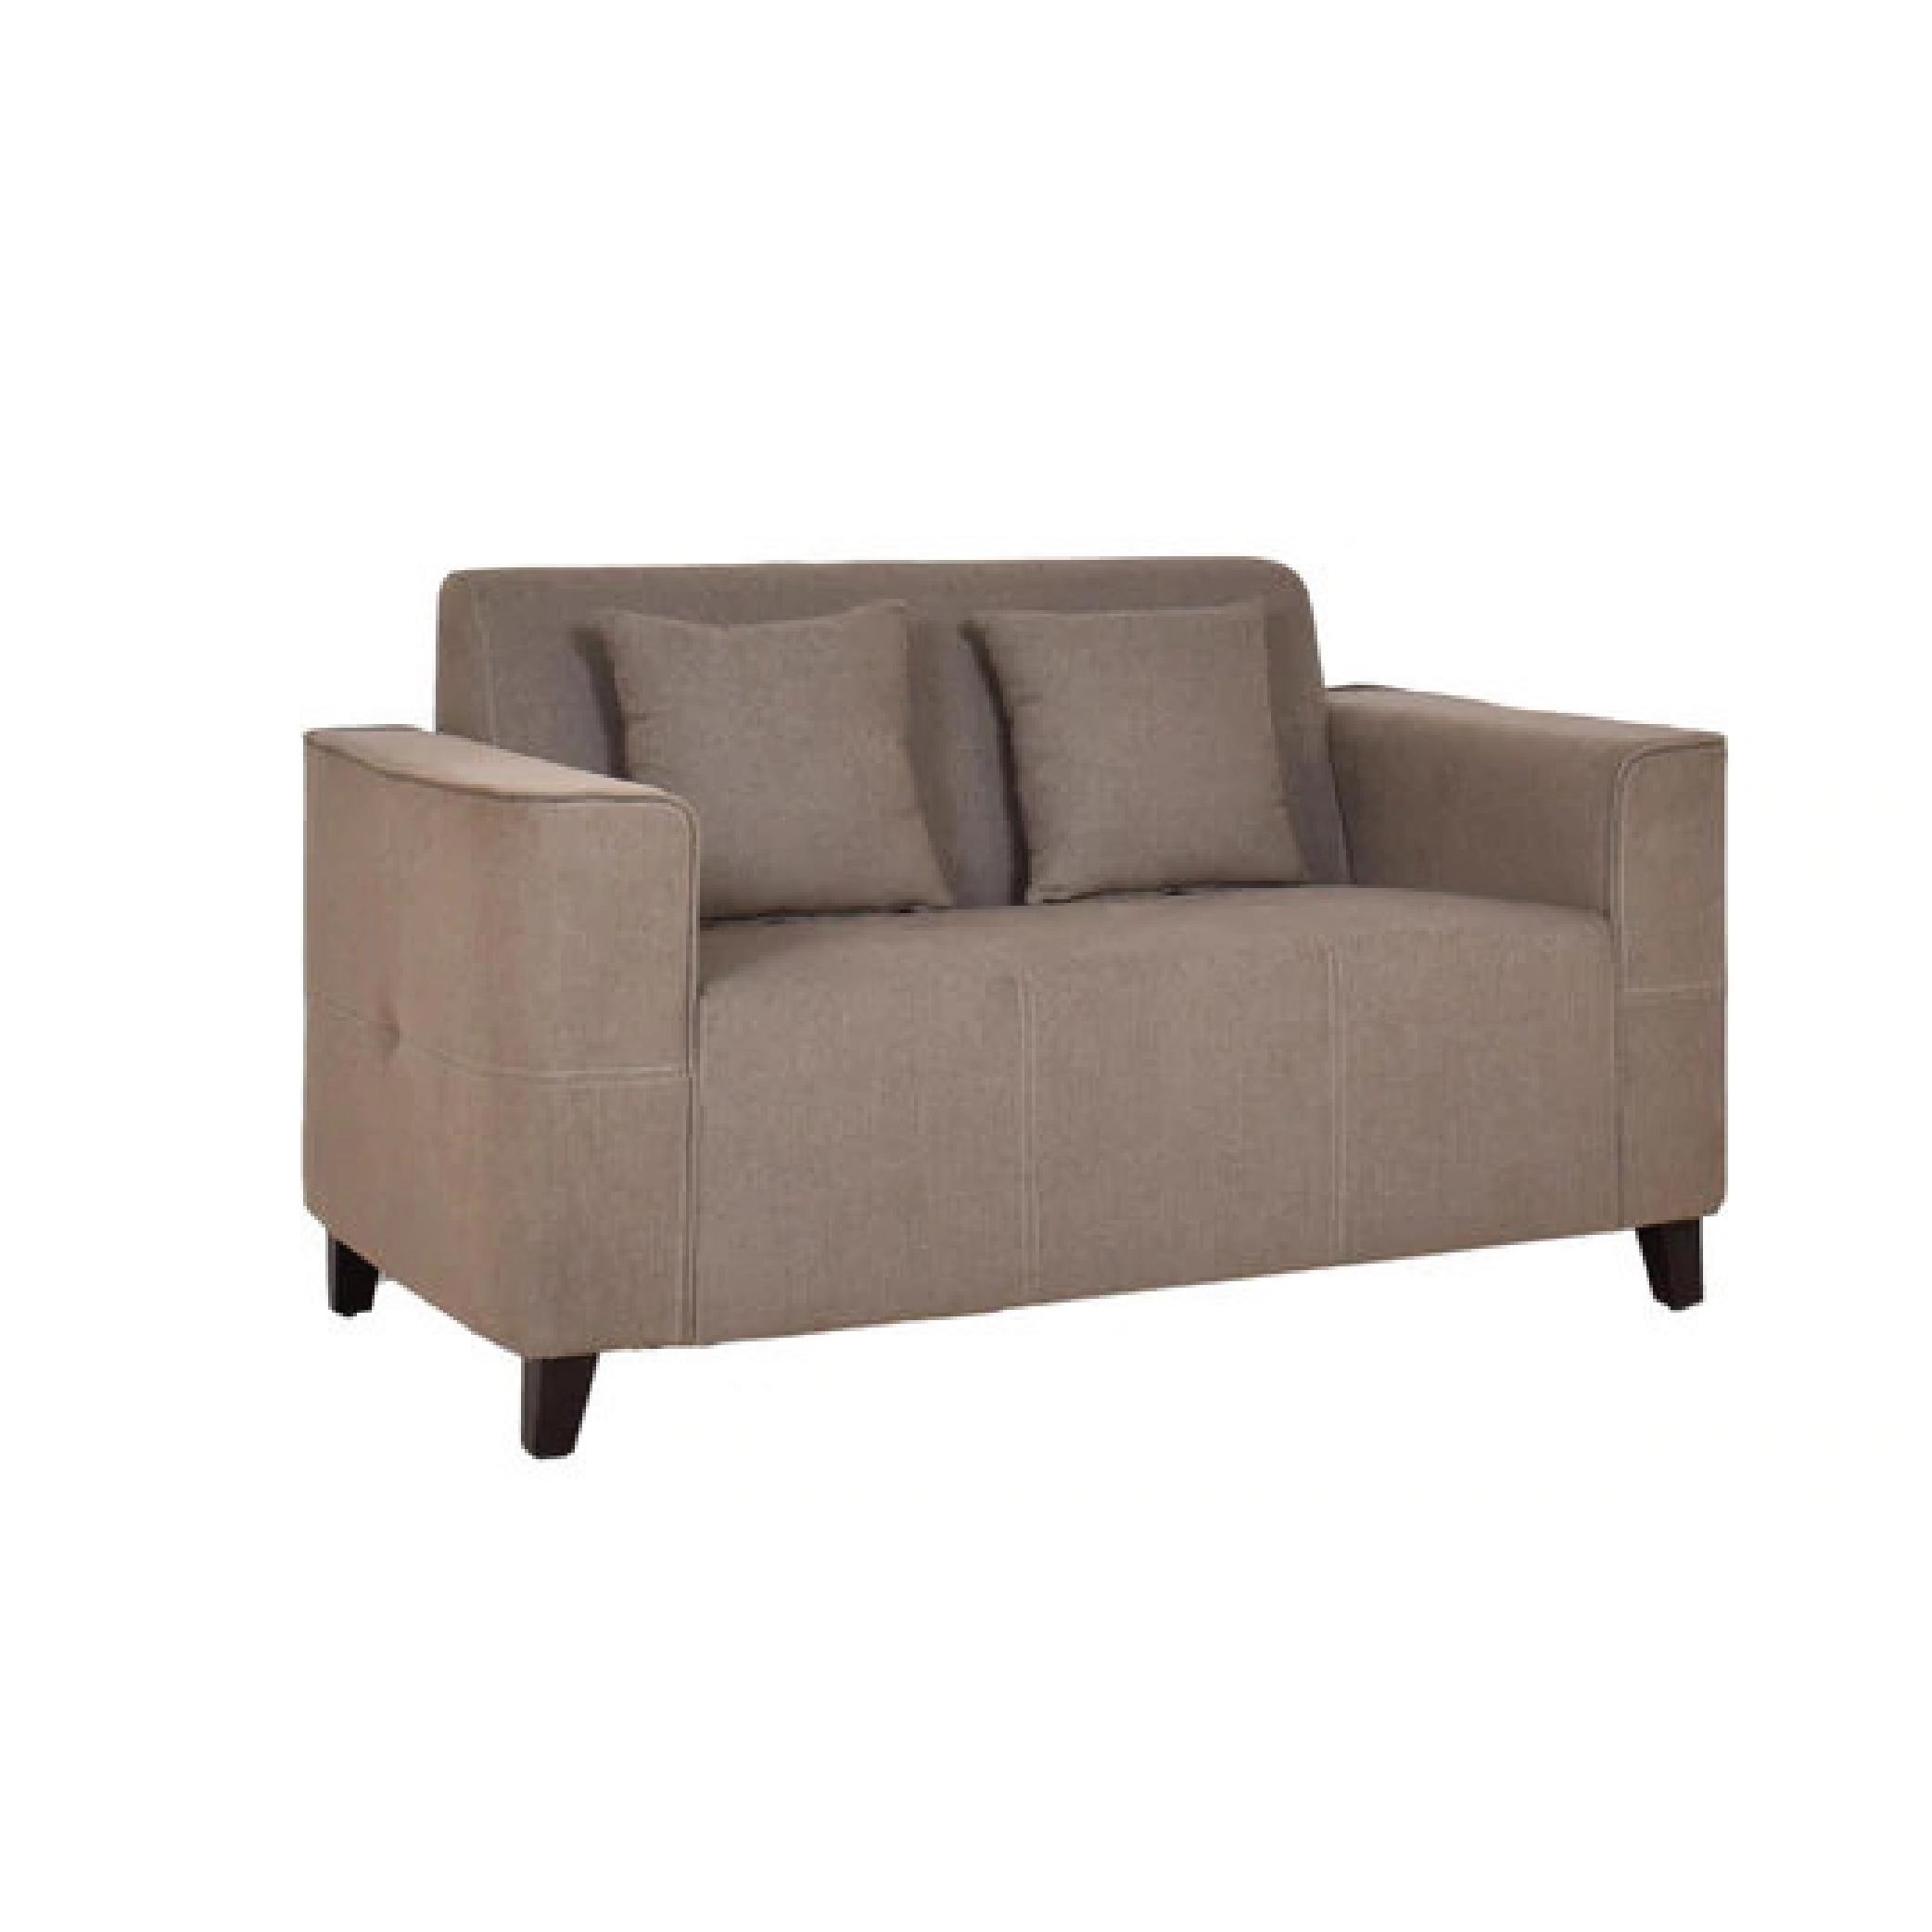 Faenza Two Seater Sofa in Sandy Brown Colour